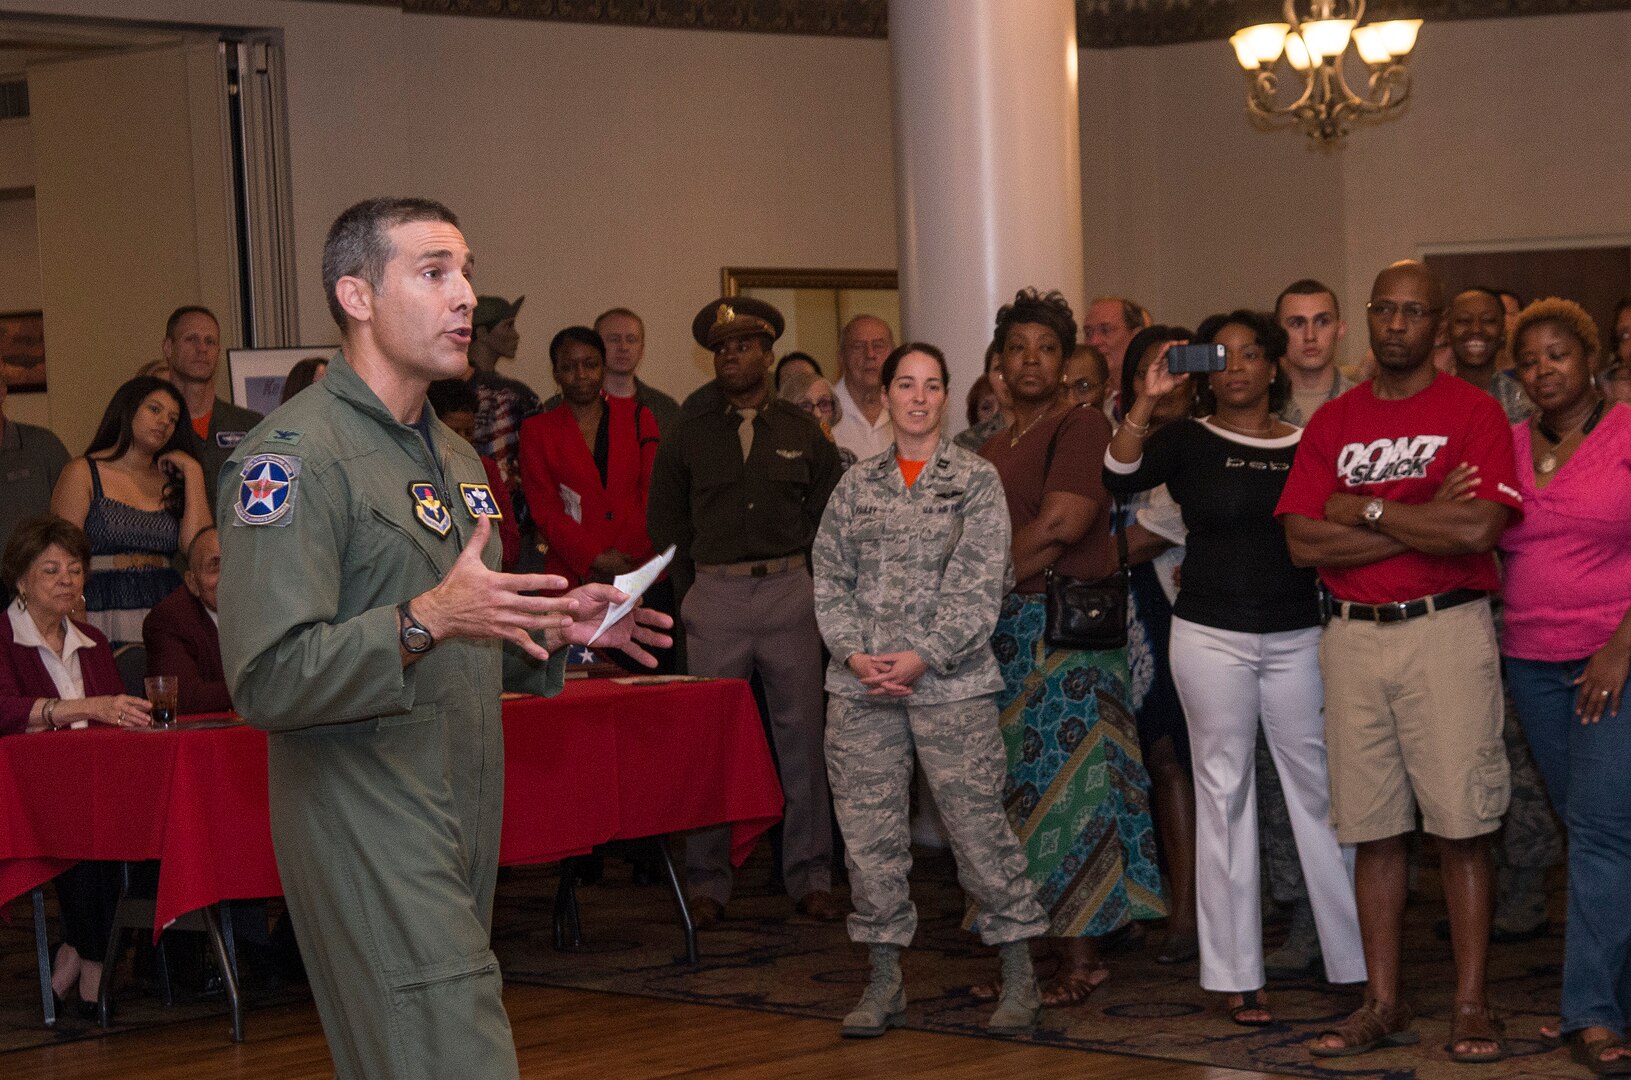 Col. Matthew Isler, 12th Flying Training Wing commander, addresses the crowd during the Tuskegee Airmen Tribute, June 12, 2015, at Joint Base San Antonio-Randolph’s Parr Club.  Members of the JBSA-Randolph community celebrated the legacy of the first all-black unit by paying tribute to seven of the documented original Tuskegee Airmen members.  The Tuskegee Airmen distinguished themselves during World War II with more than 15,500 sorties and 1,500 missions in Europe and North Africa and earned numerous combat awards.  The event featured musical entertainment, comments by 12th Flying Training Wing leaders, an introduction of four Tuskegee Airmen present and a presentation of gifts to them. Members of the audience had an opportunity to mingle with the Tuskegee Airmen and listen to their stories. (U.S. Air Force photo by Johnny Saldivar/released)